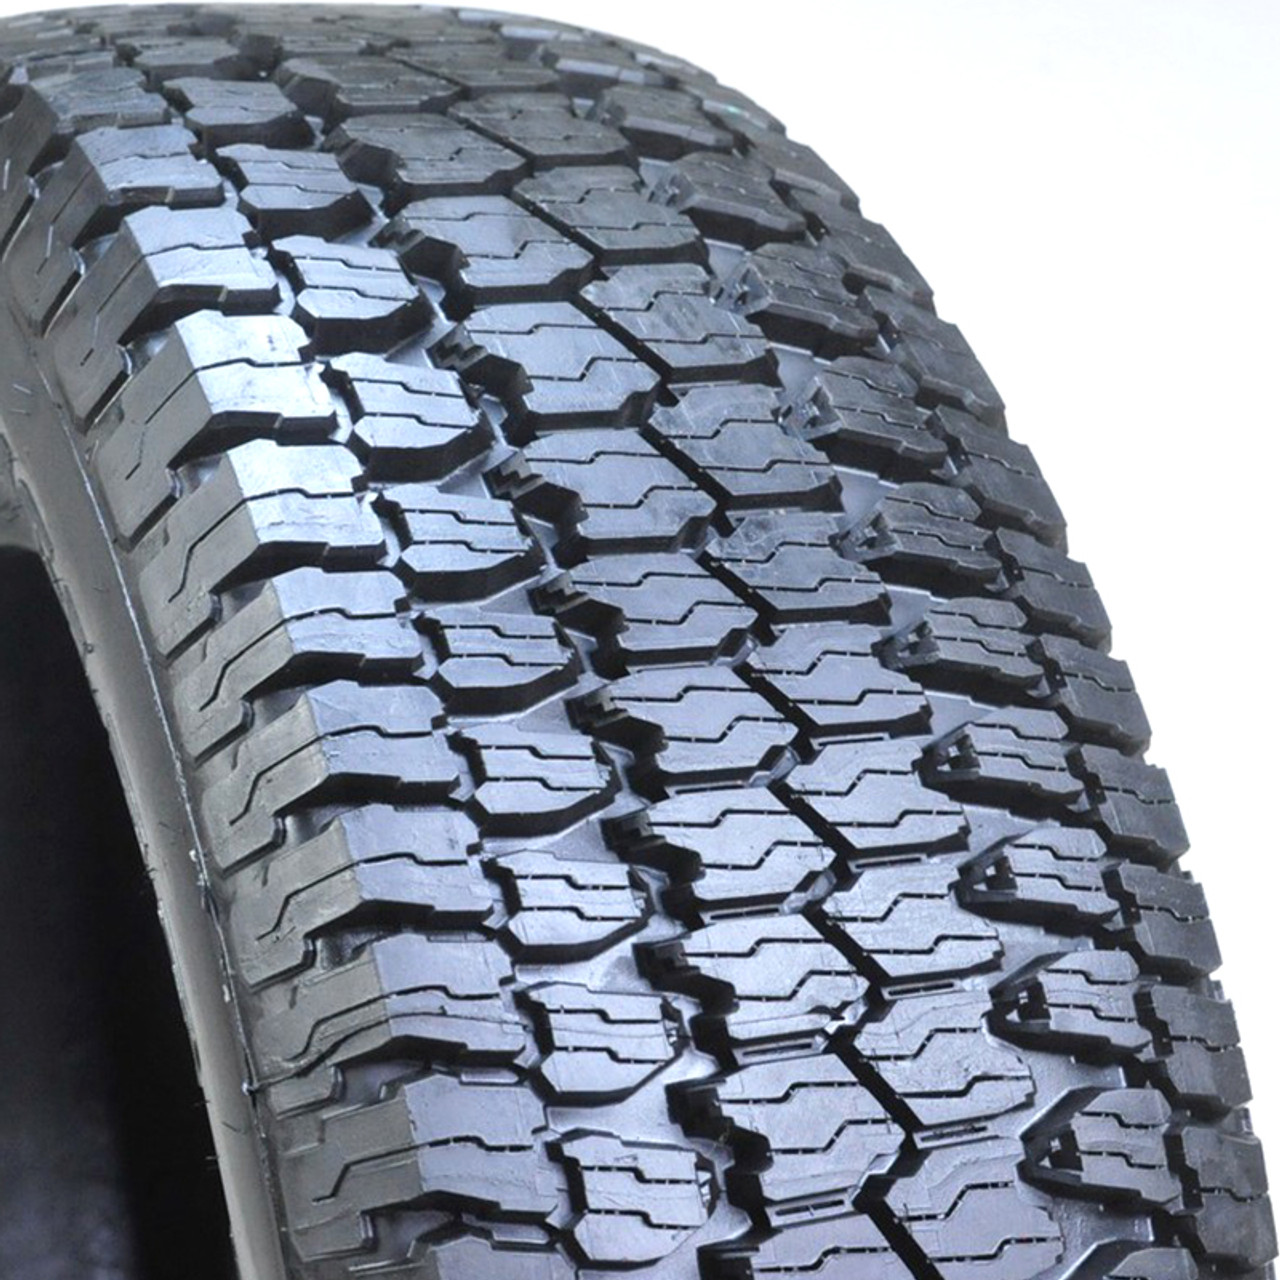 Goodyear Wrangler AT/S (OE) 235/75R15 109S XL AT A/T All Terrain Tire